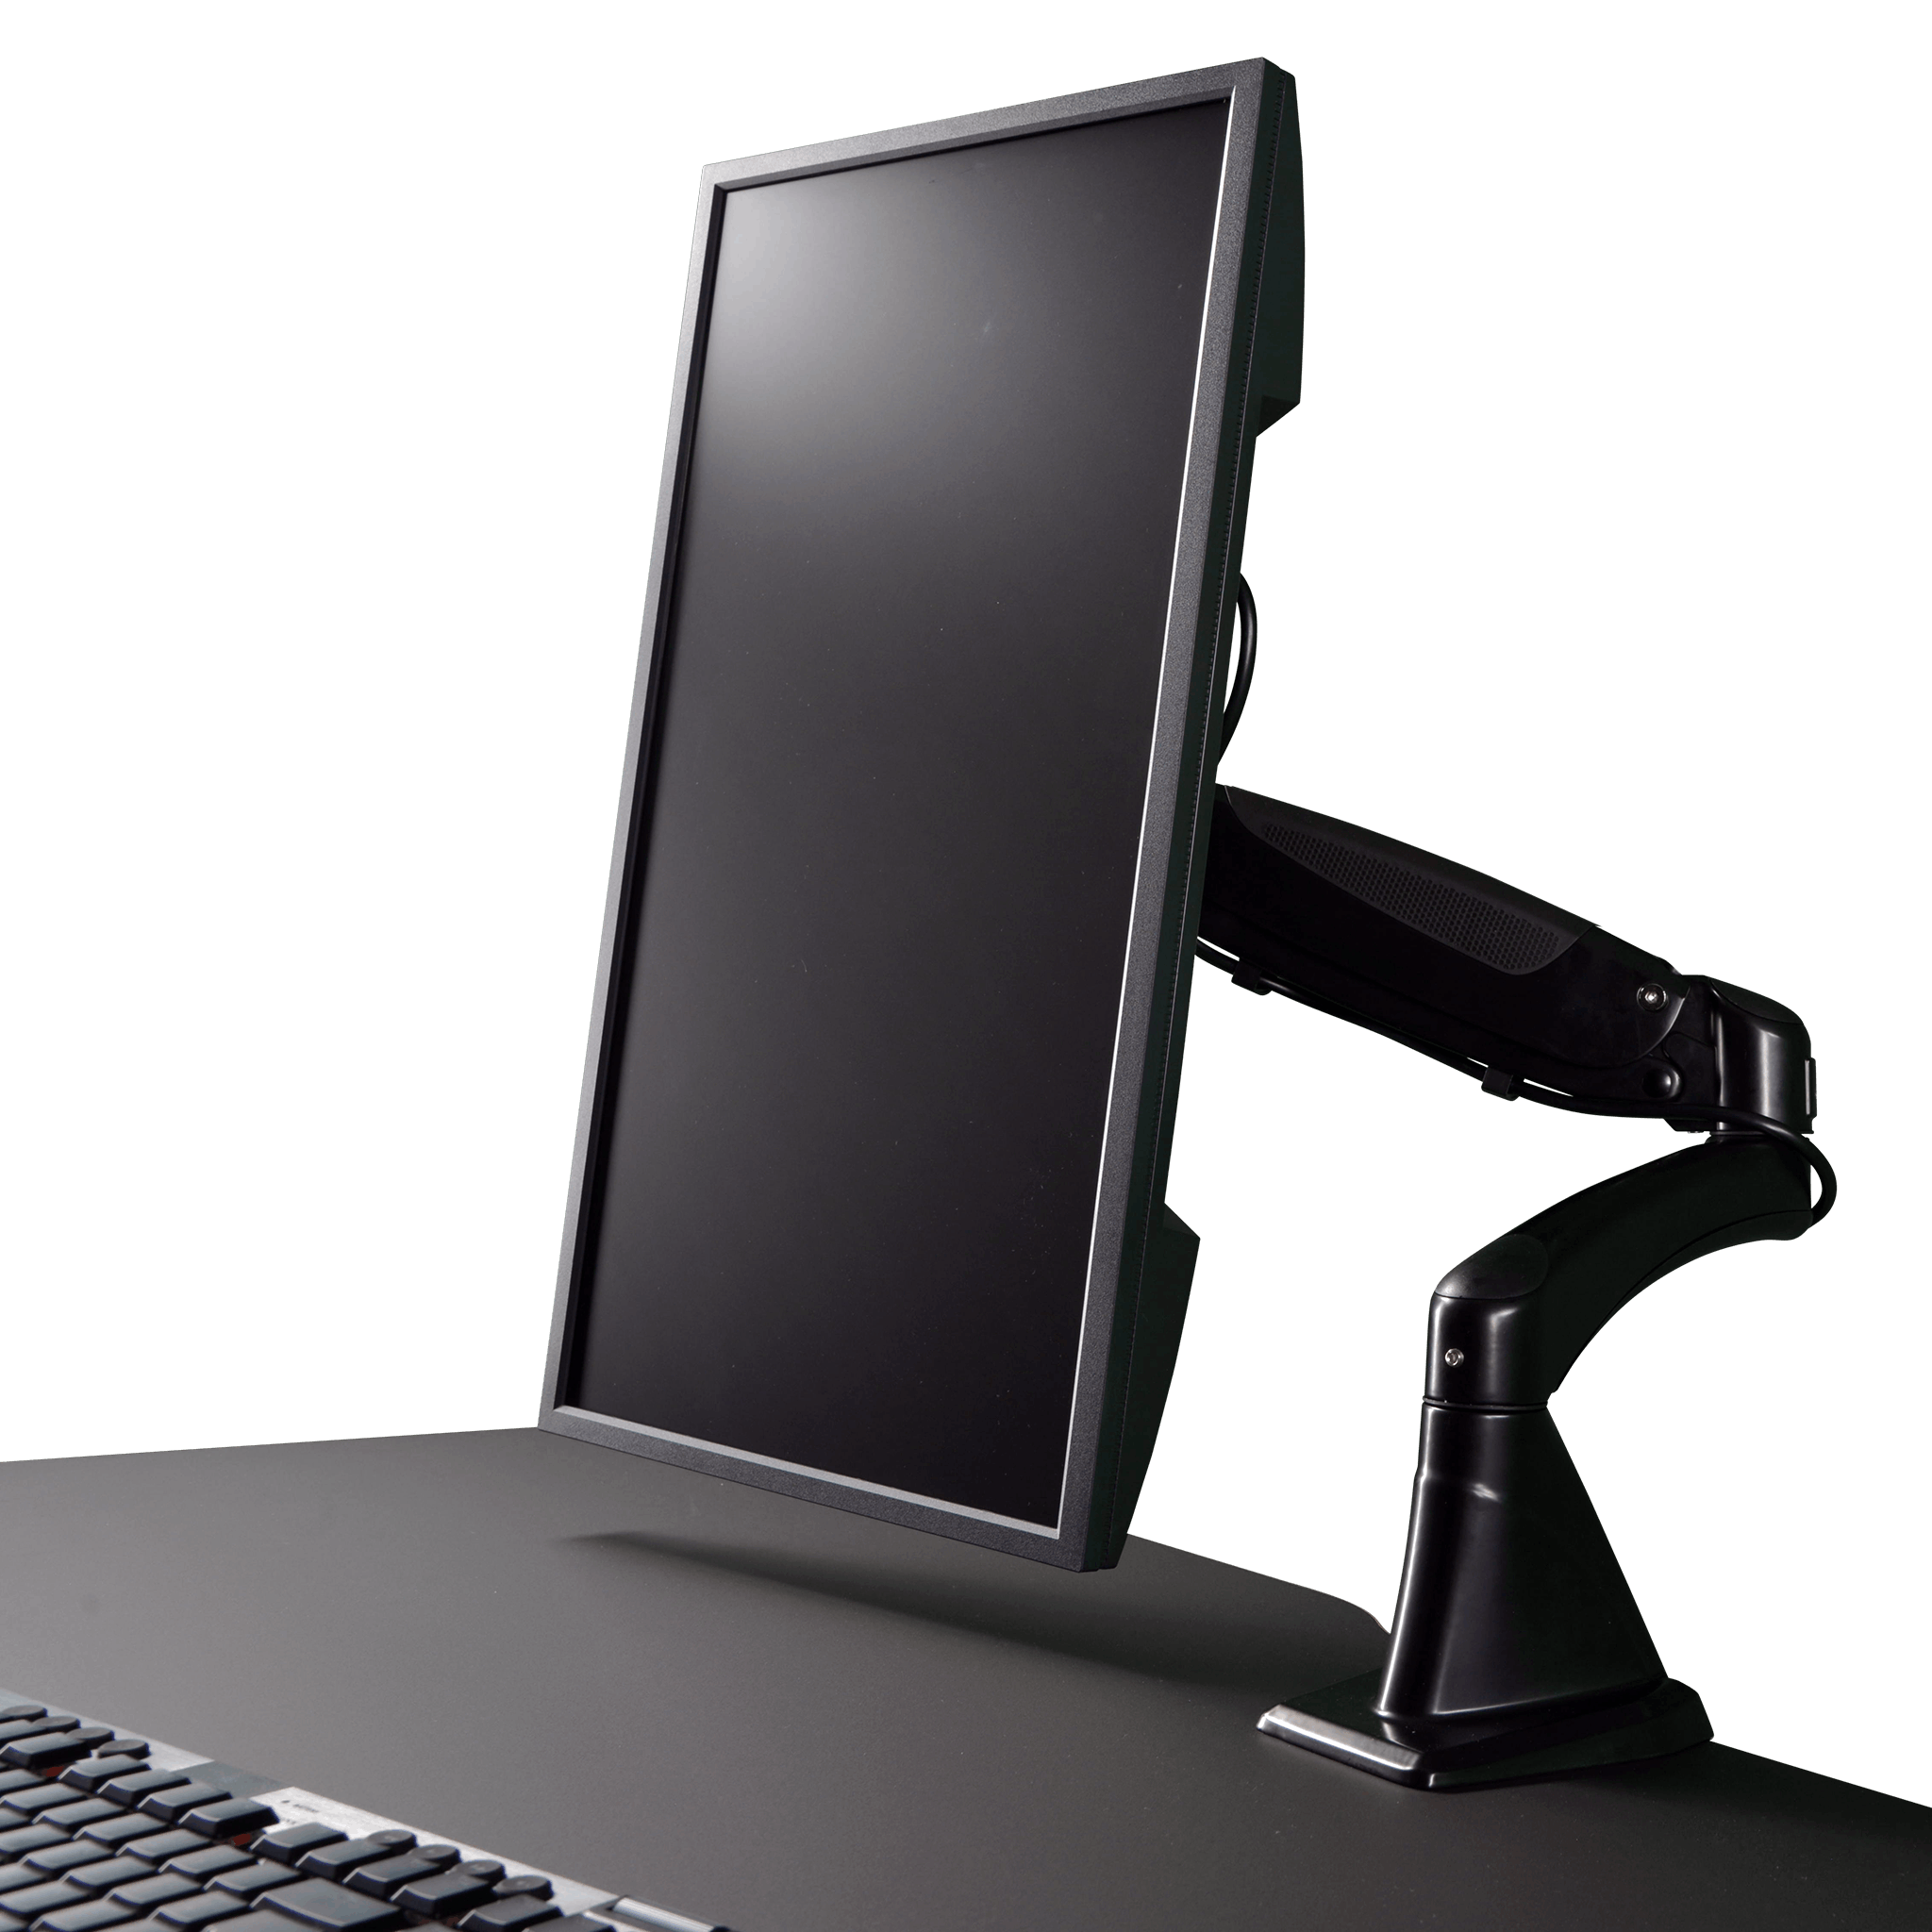 The LeetDesk Monitor Arm can rotate any screen (pivot)